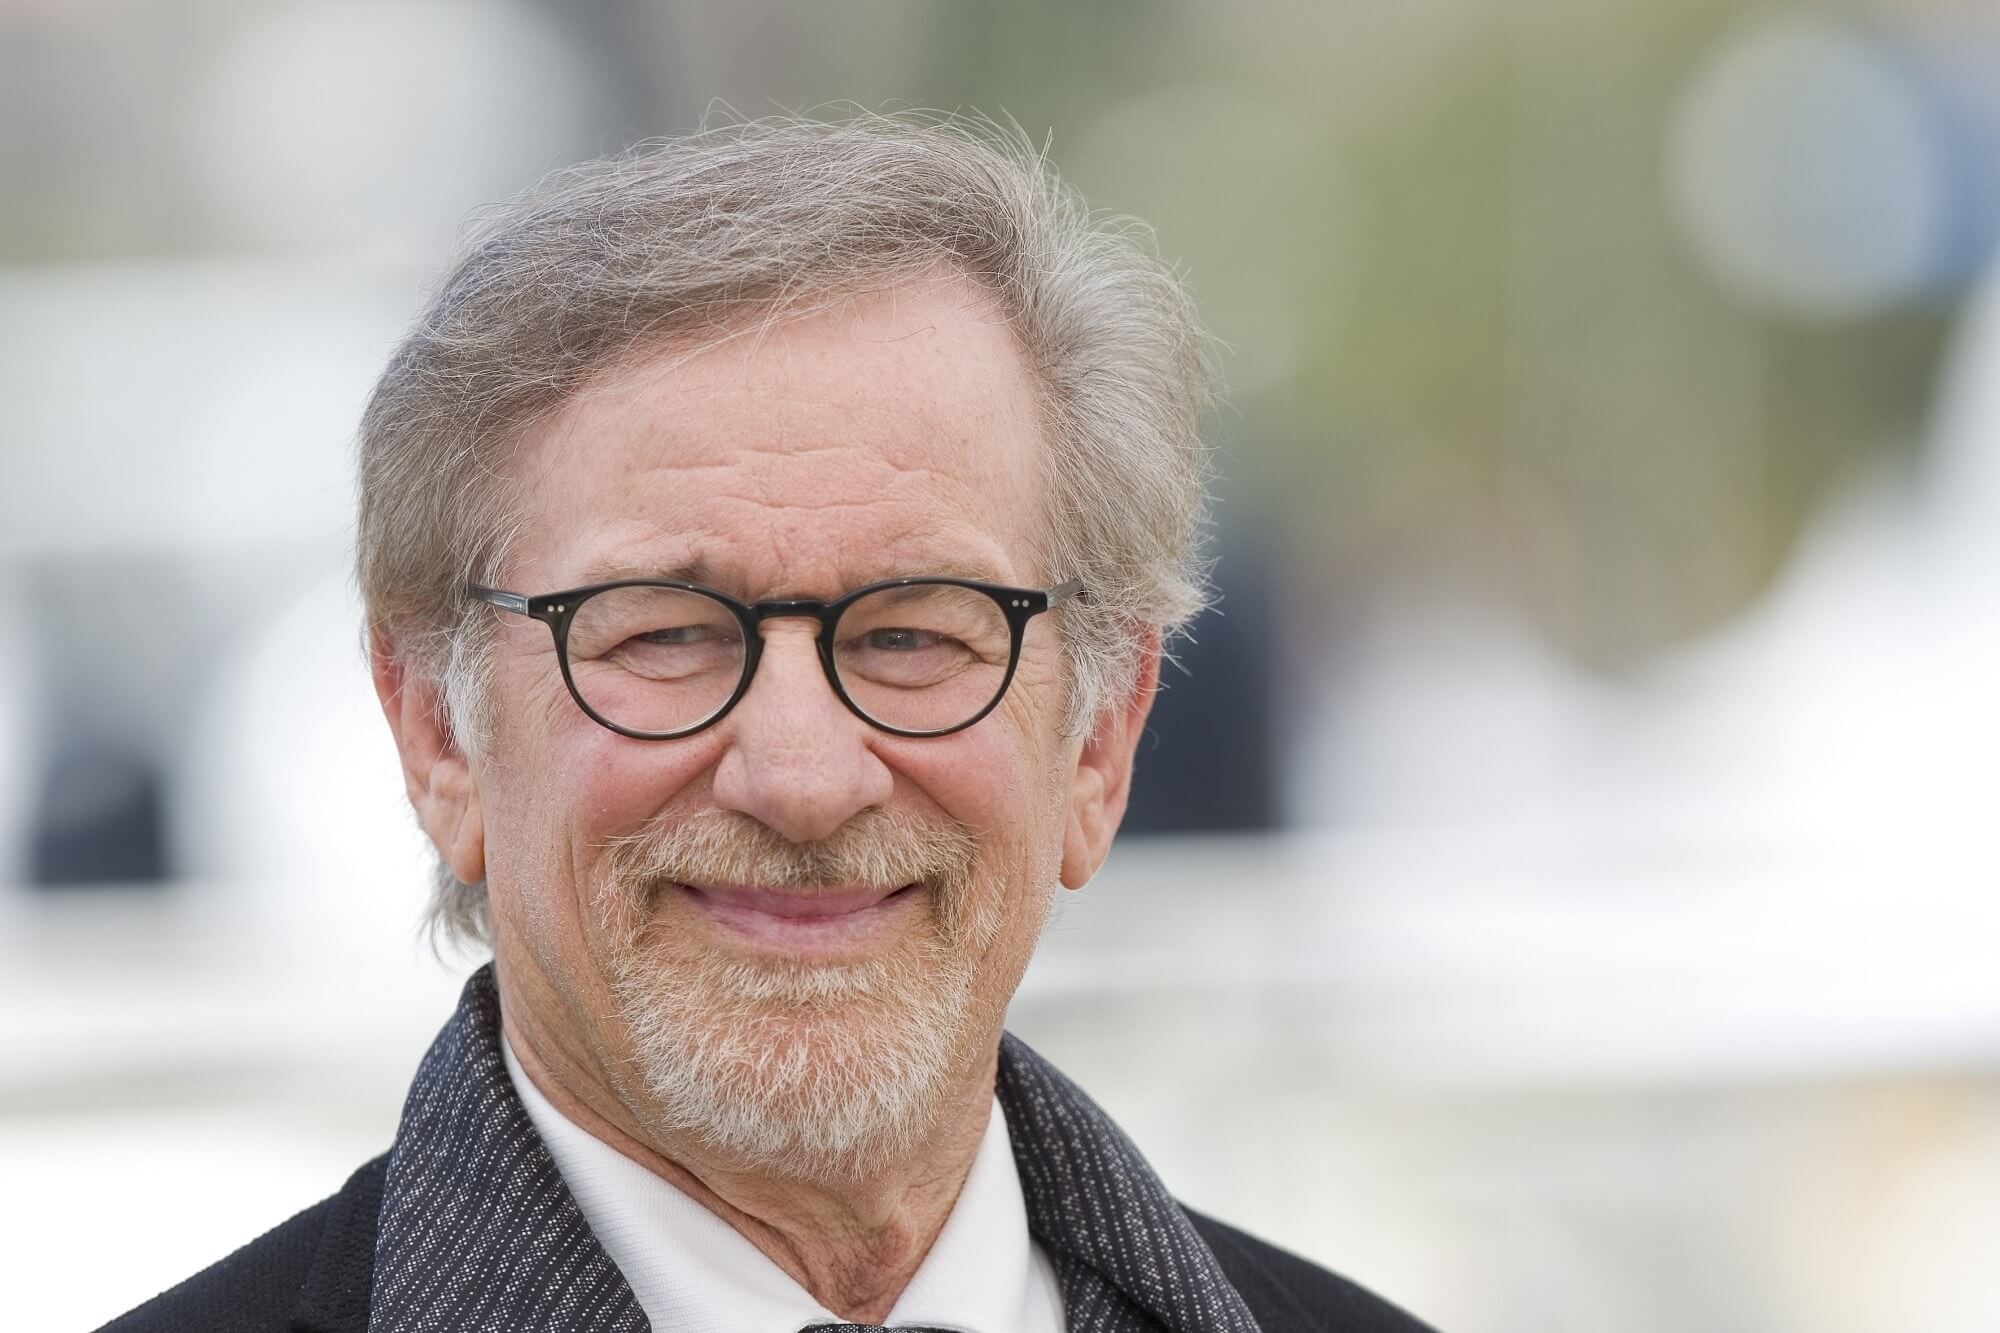 Steven Spielberg looks to ban Netflix titles from the Oscars